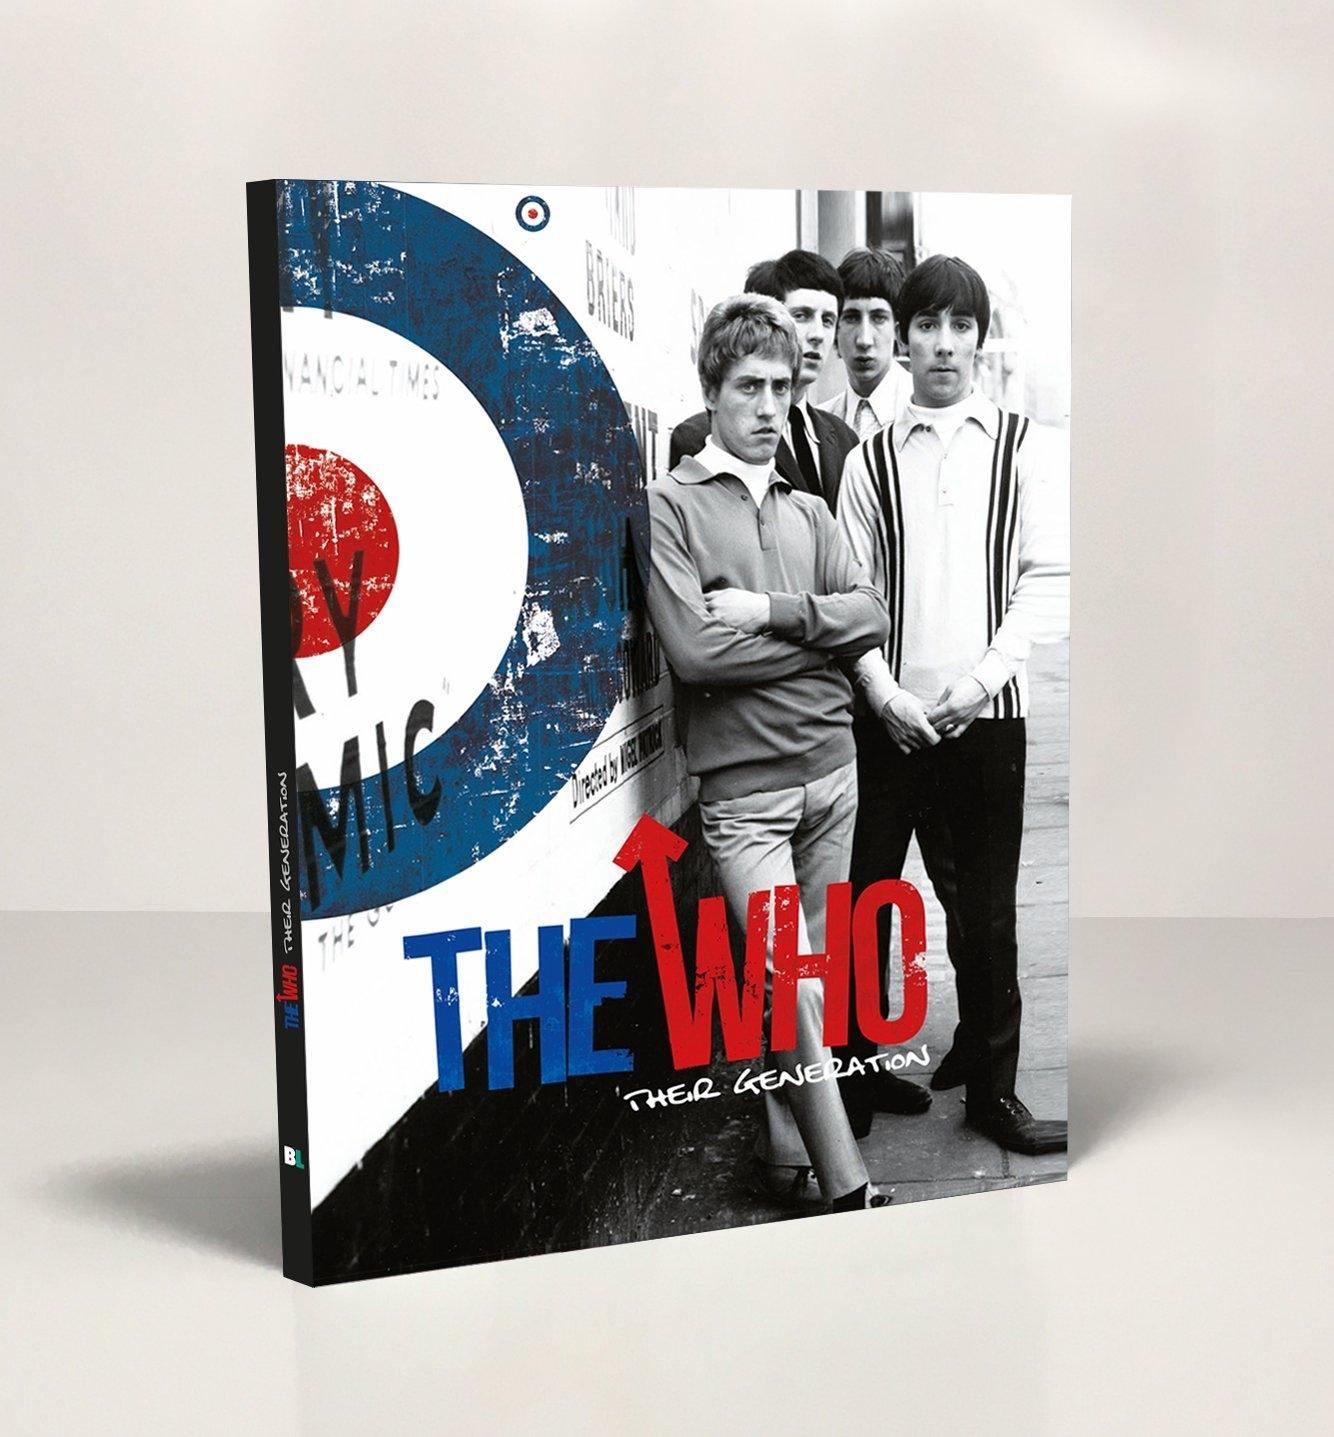 The Who "Their Generation". 